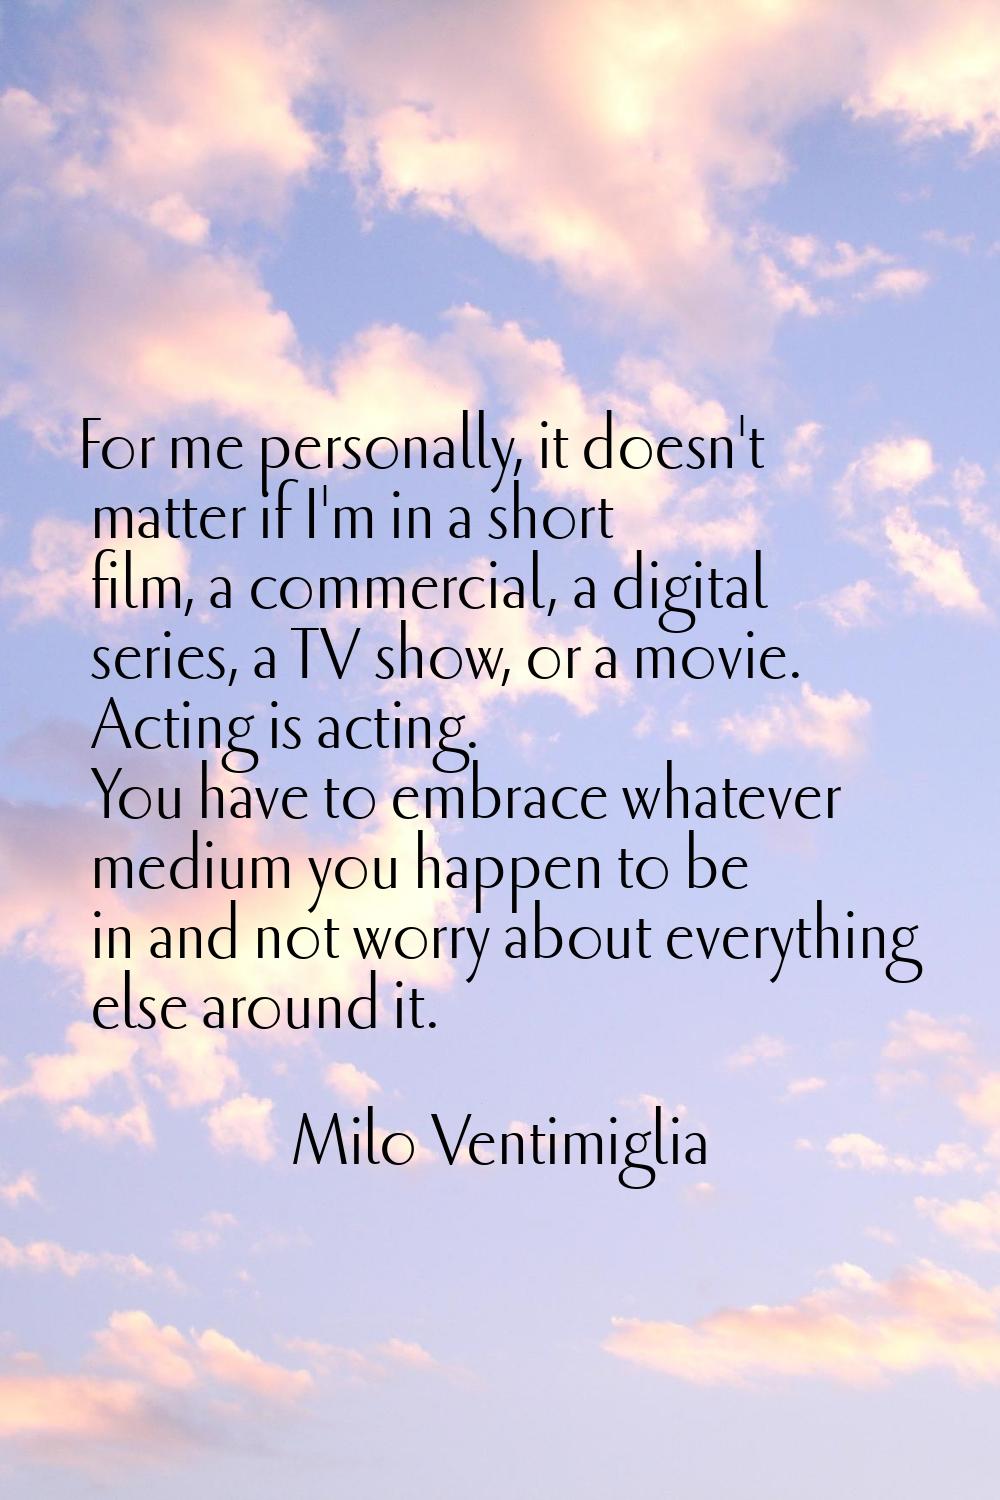 For me personally, it doesn't matter if I'm in a short film, a commercial, a digital series, a TV s